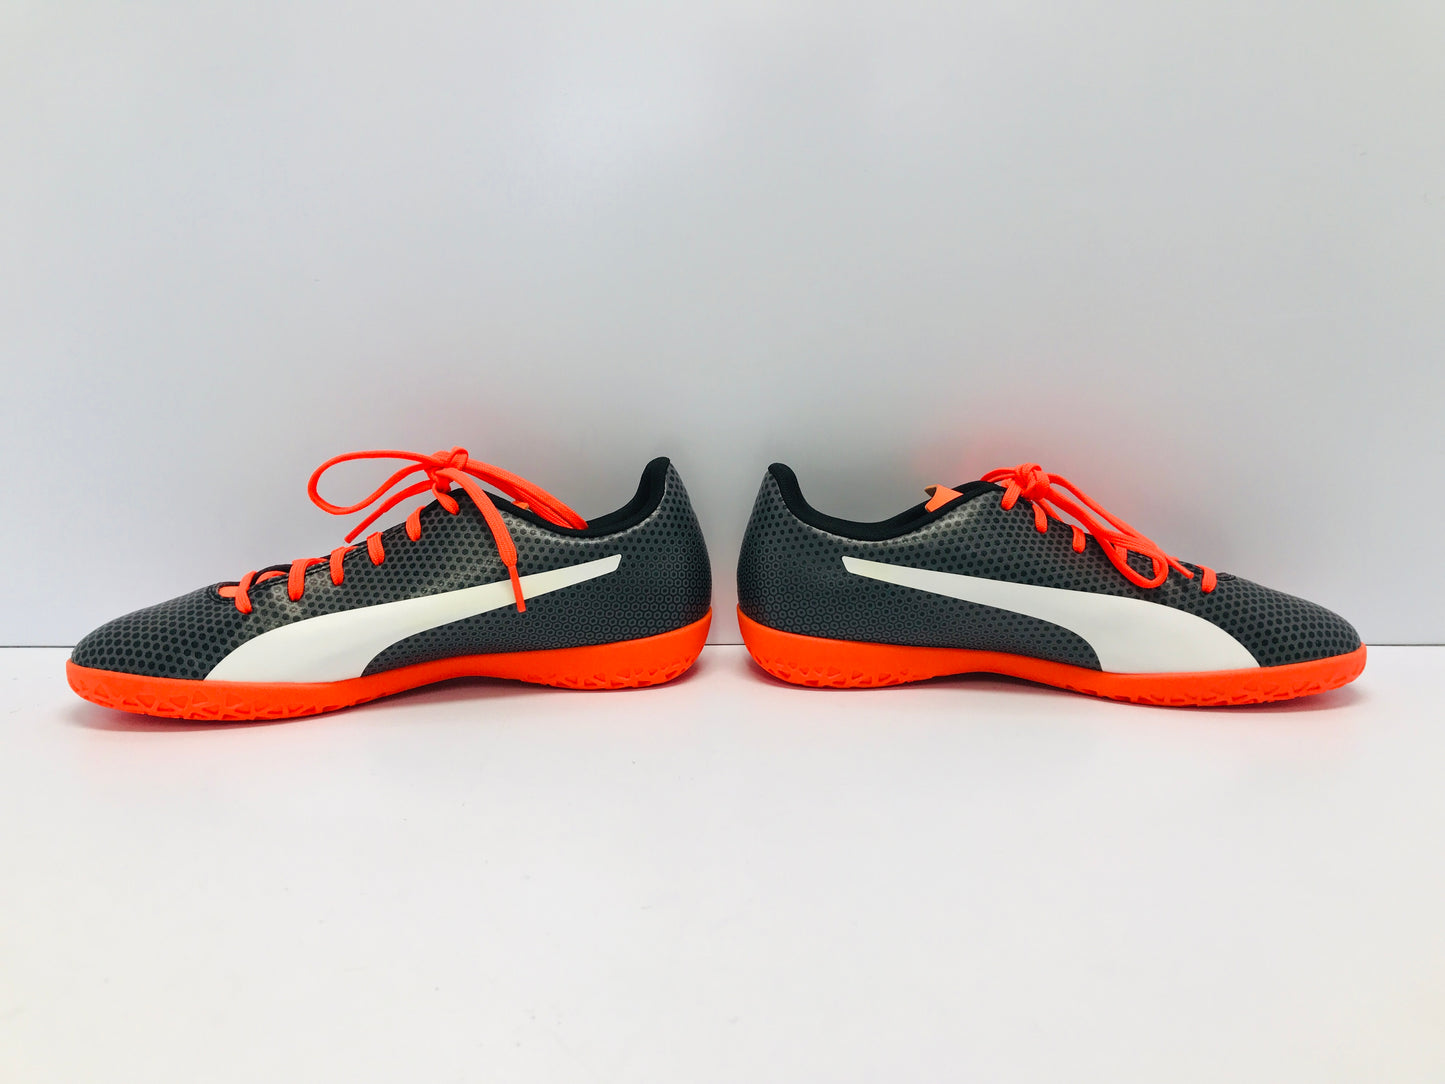 Soccer Shoes Cleats Men's Size 8 Puma Indoor Flat Rubber Soles Grey black Tangerine New Never Used